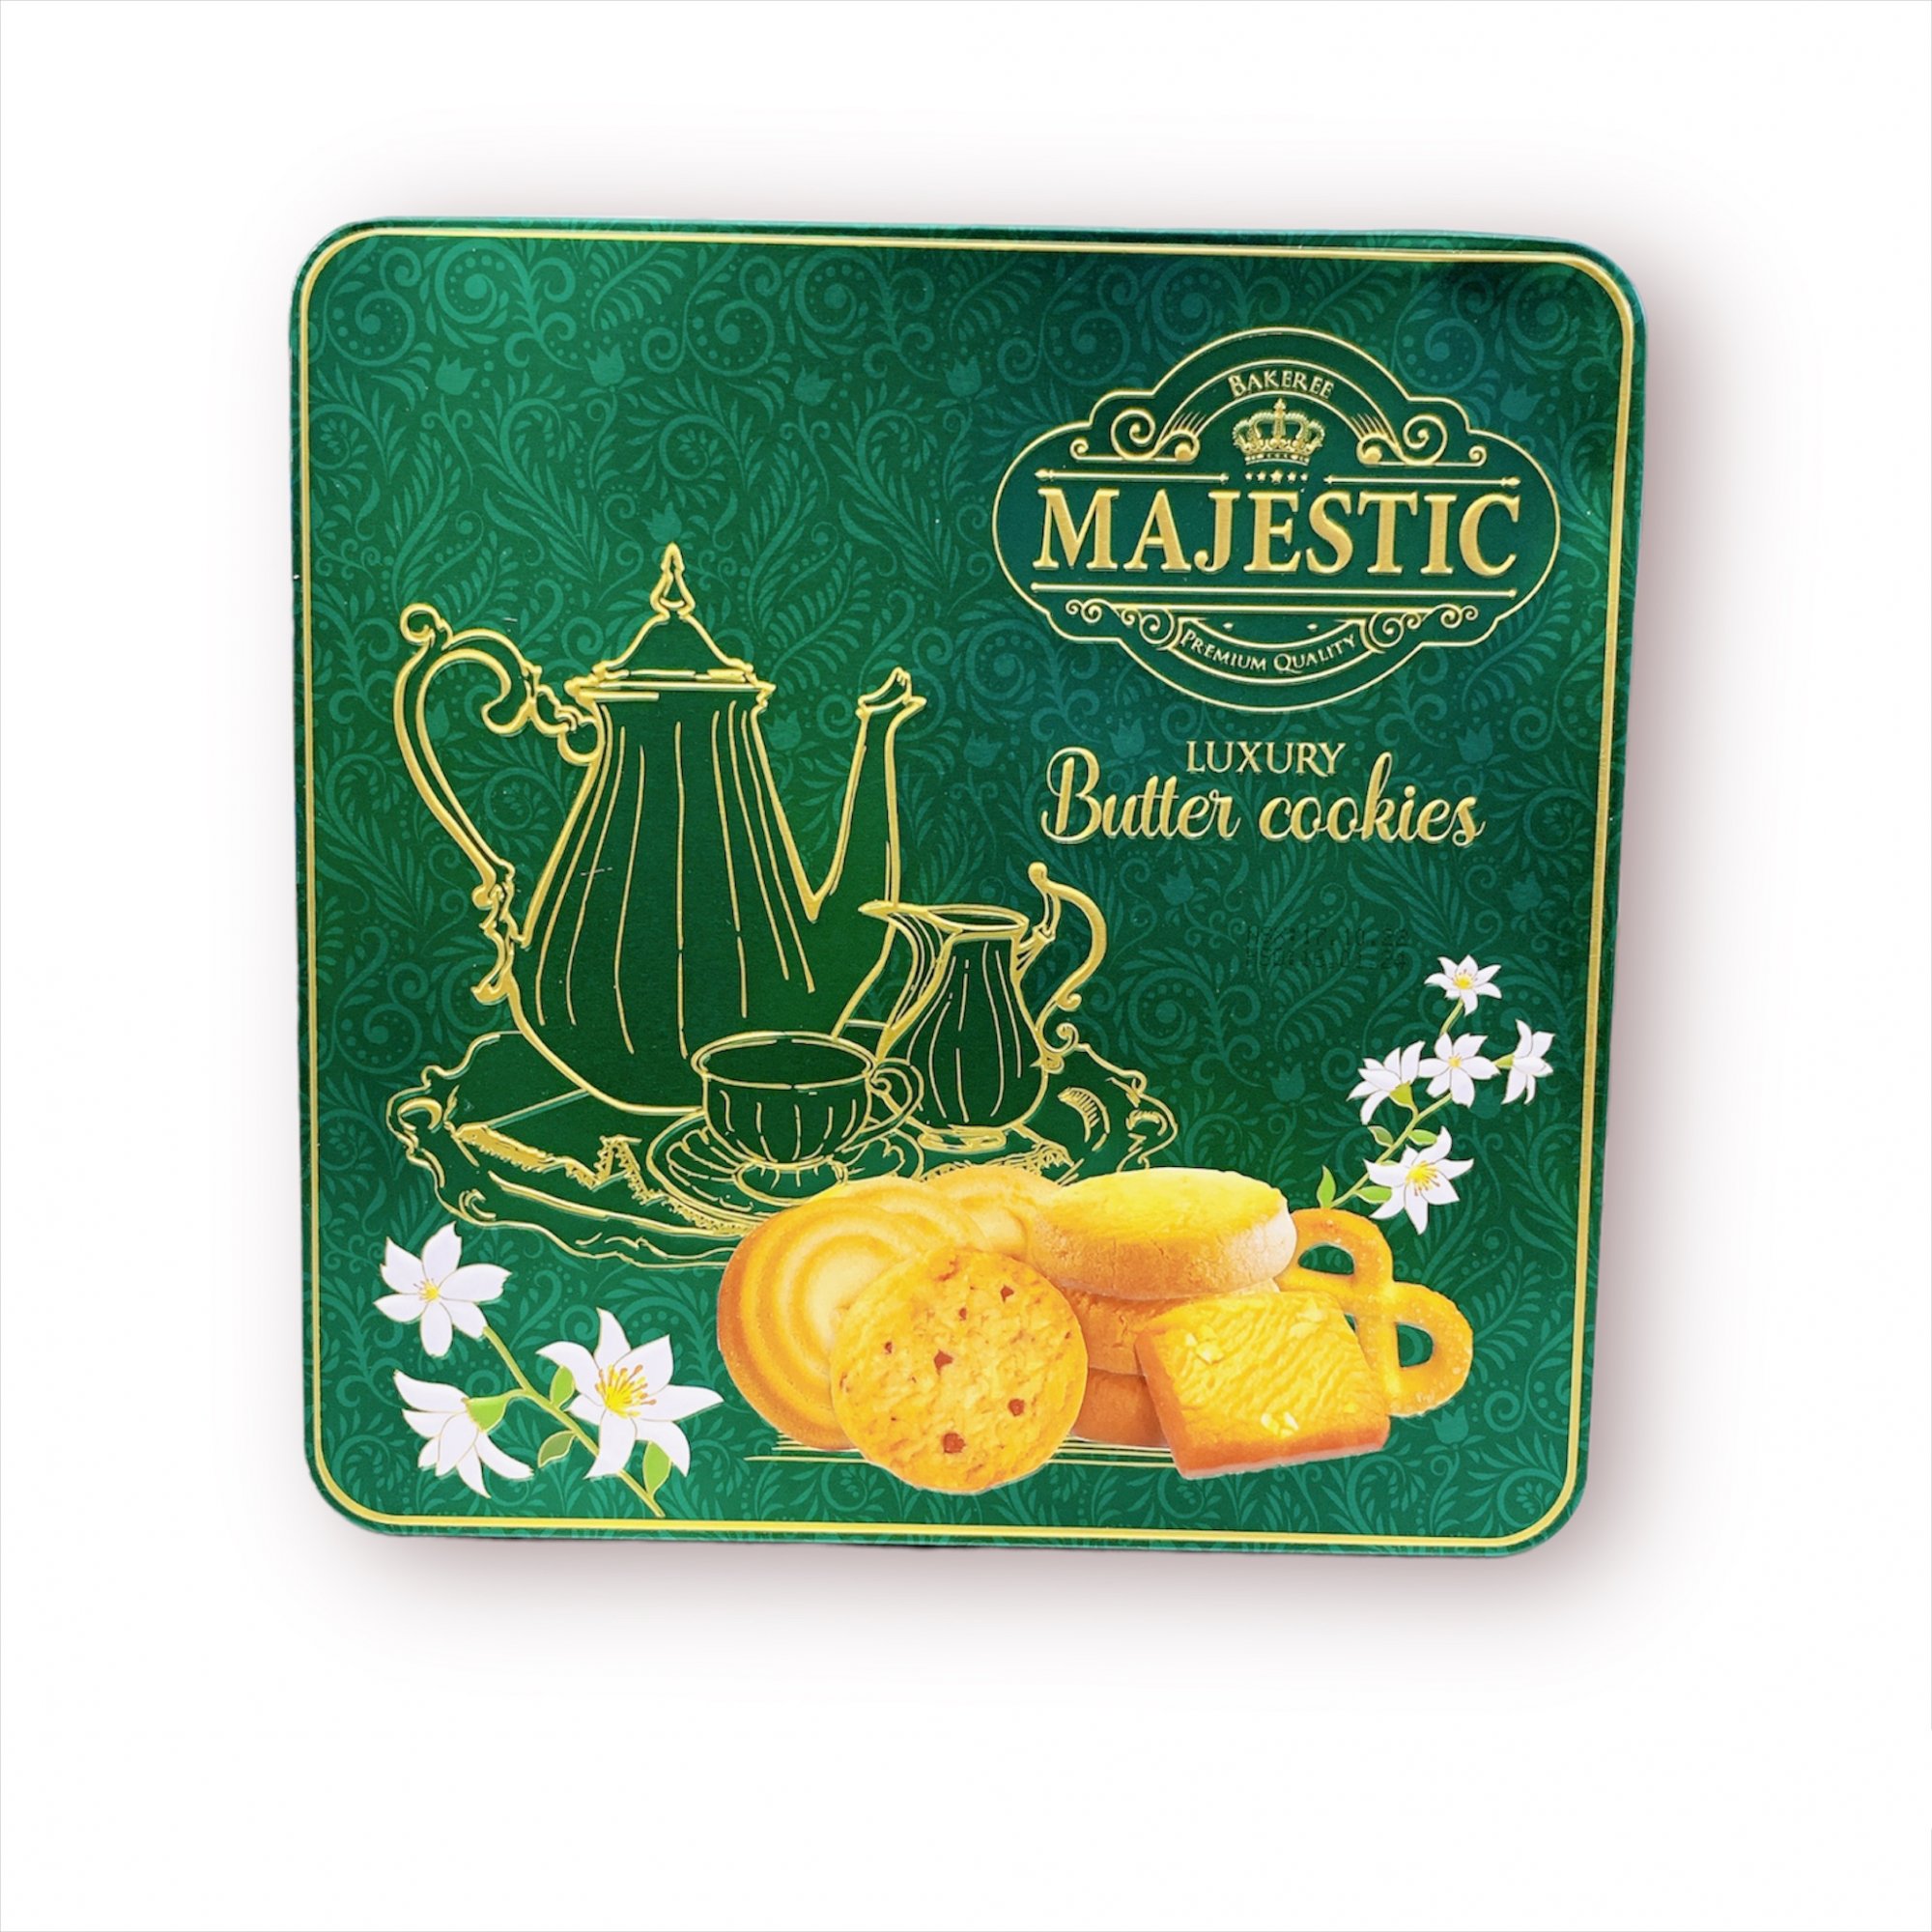 Bánh Quy Hộp Thiết Majestic Luxury Better Cookie 468g